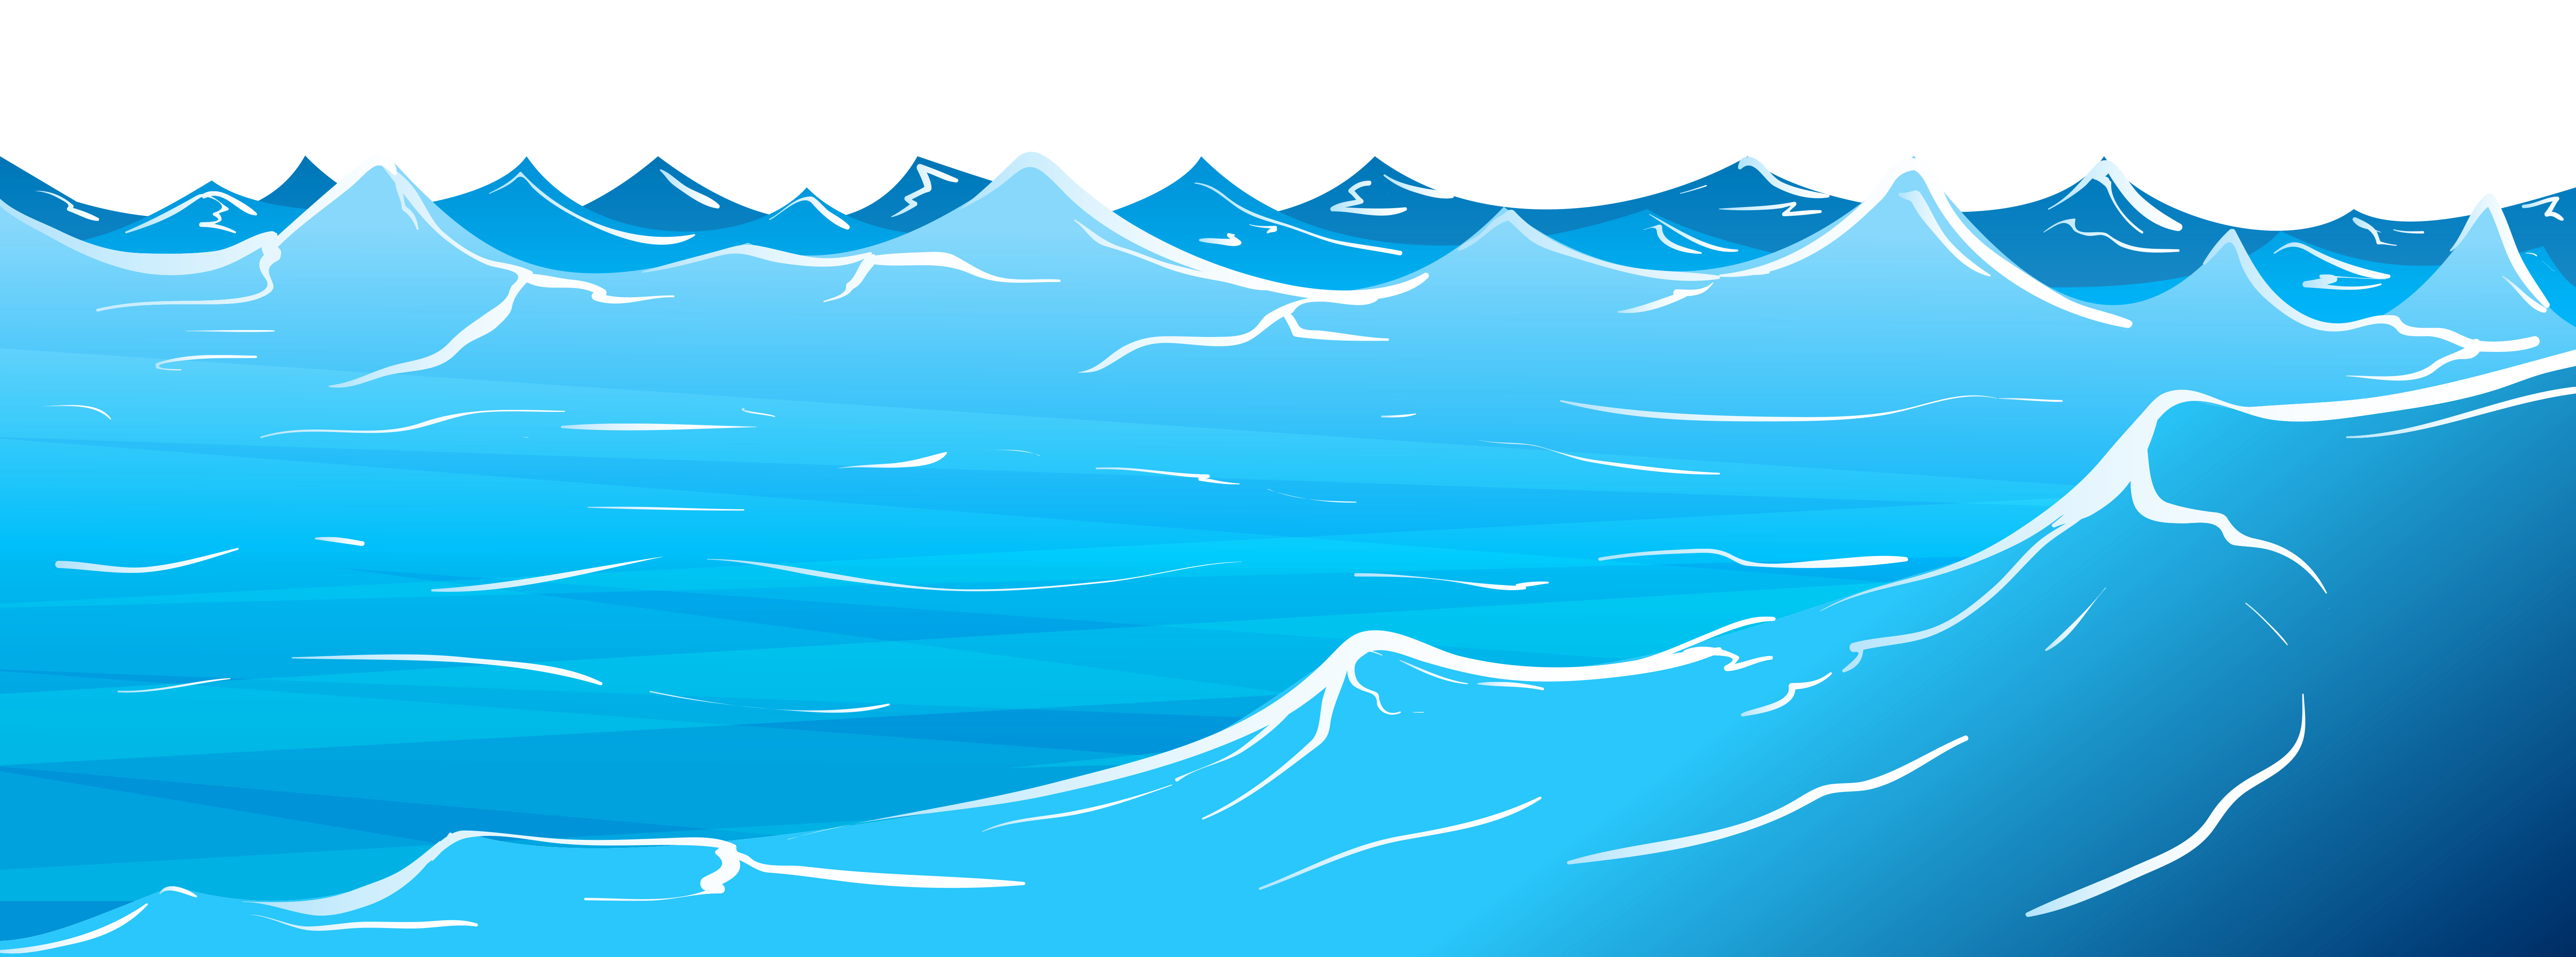  collection of high. Evaporation clipart ocean